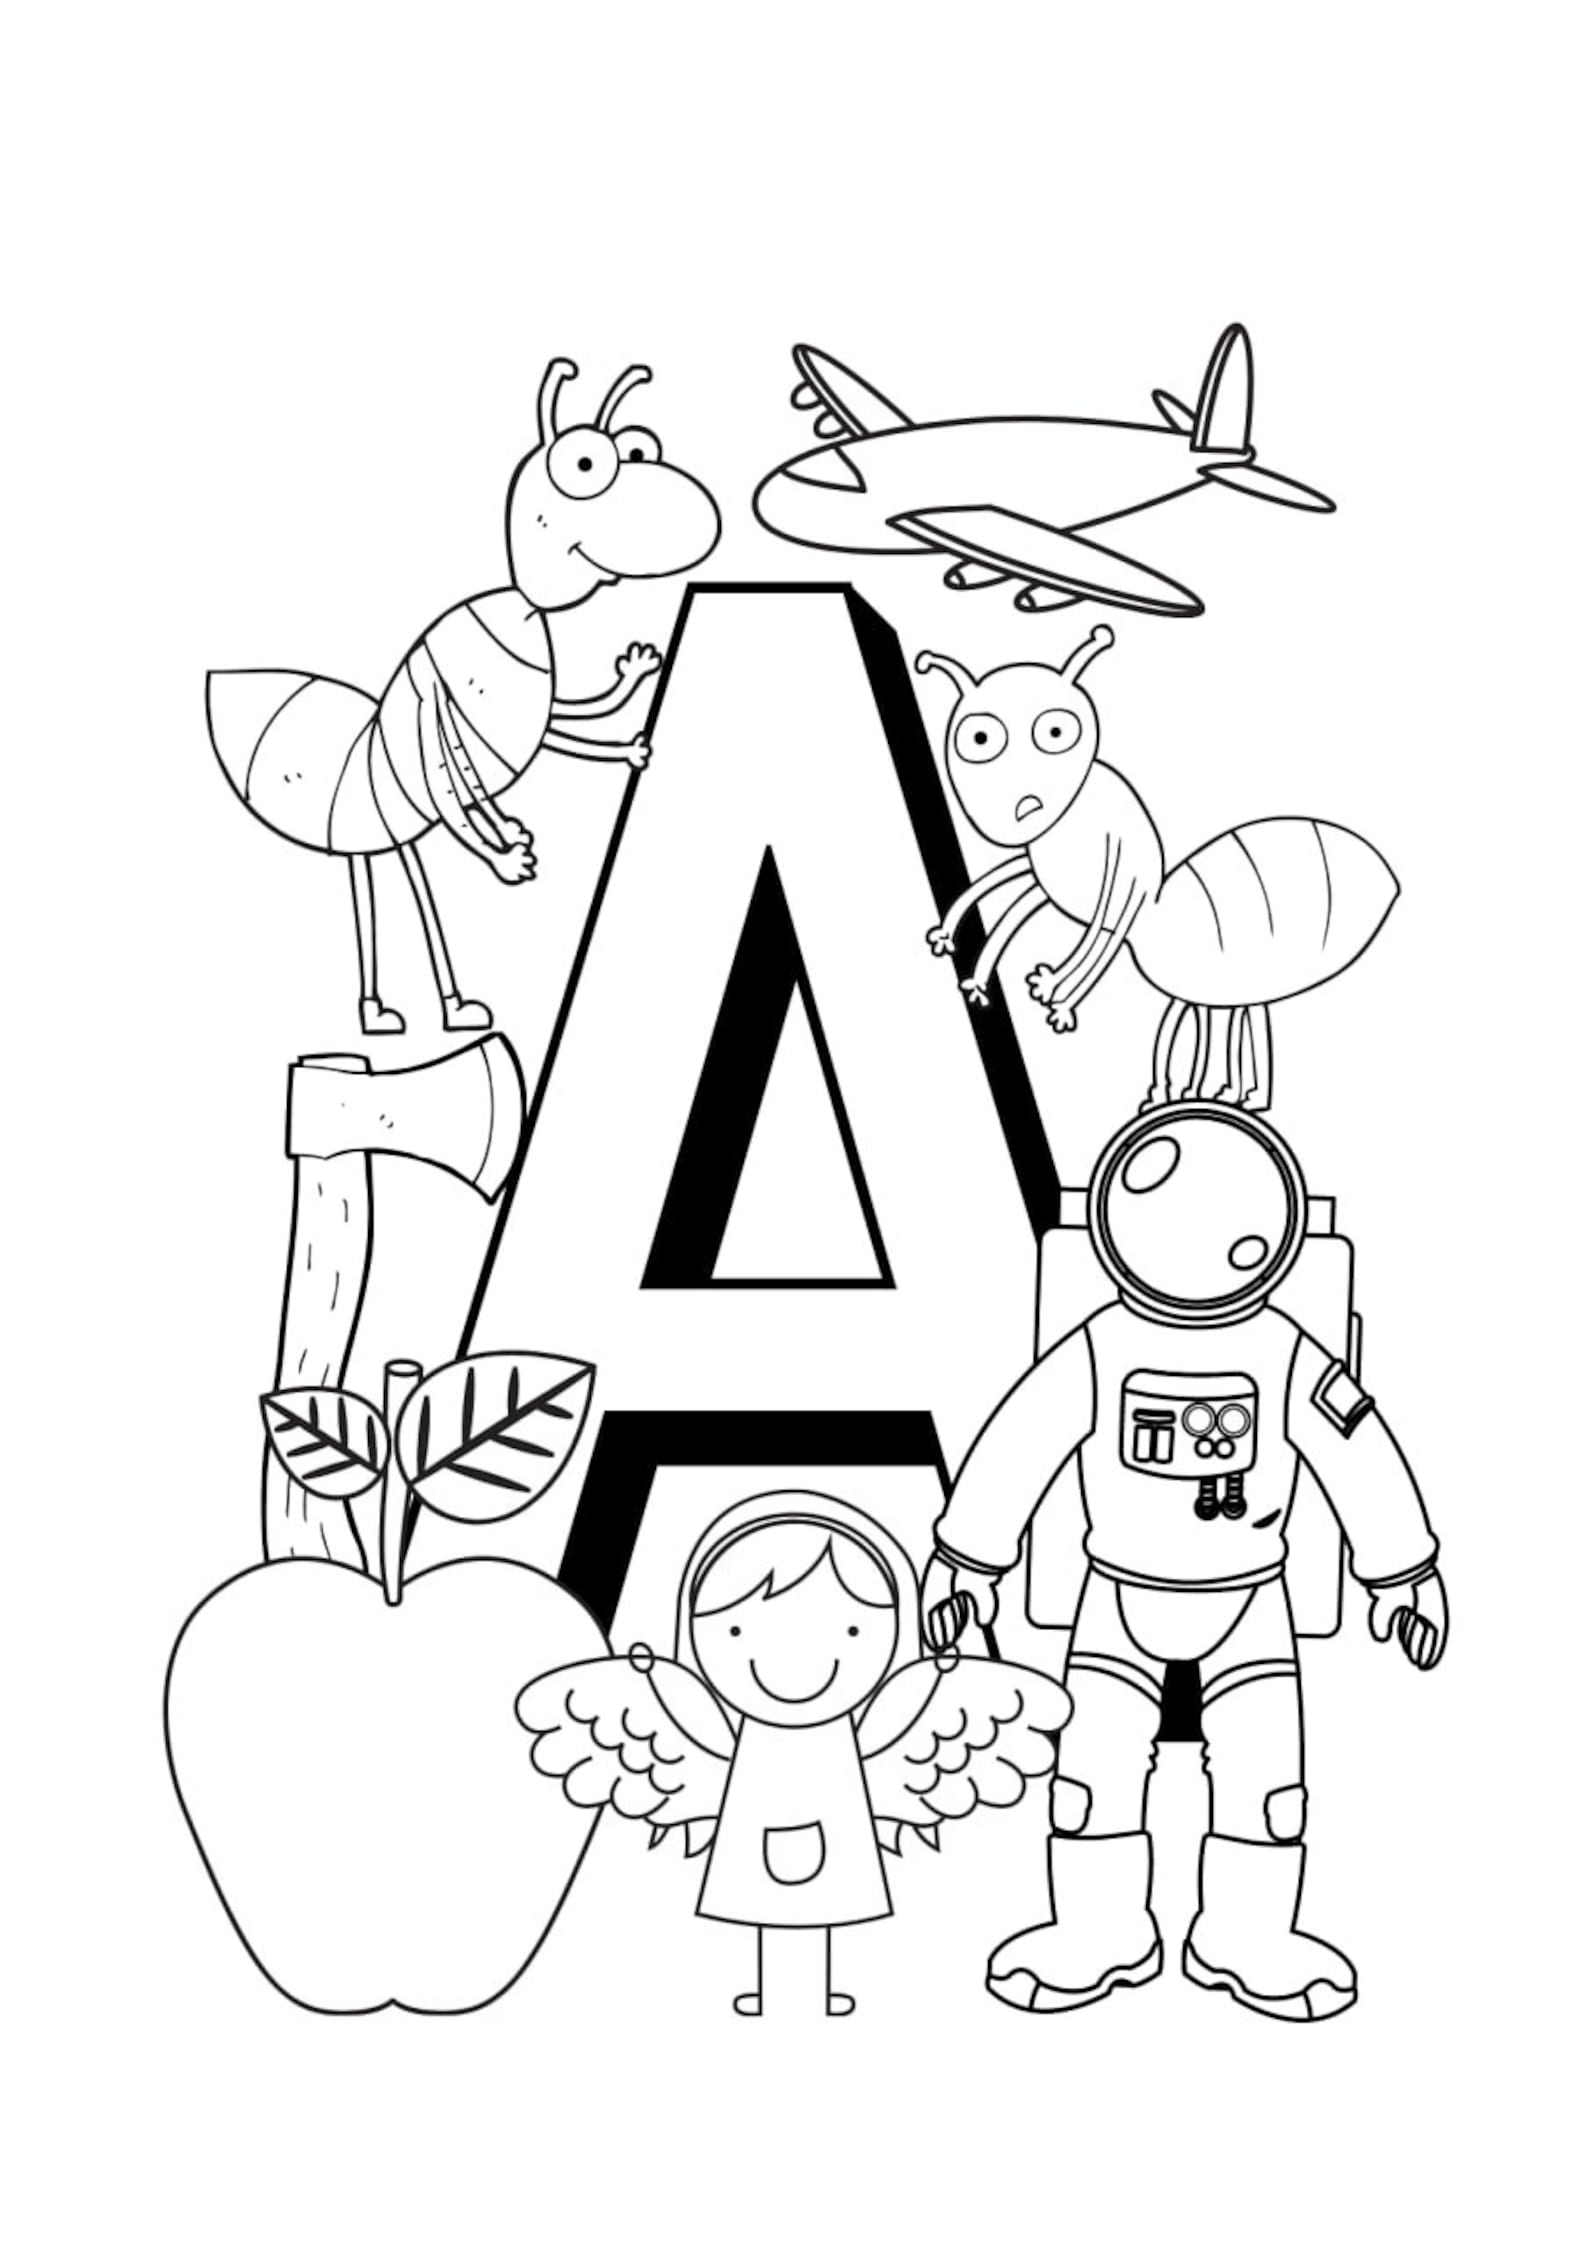 kindergarten educational coloring pages